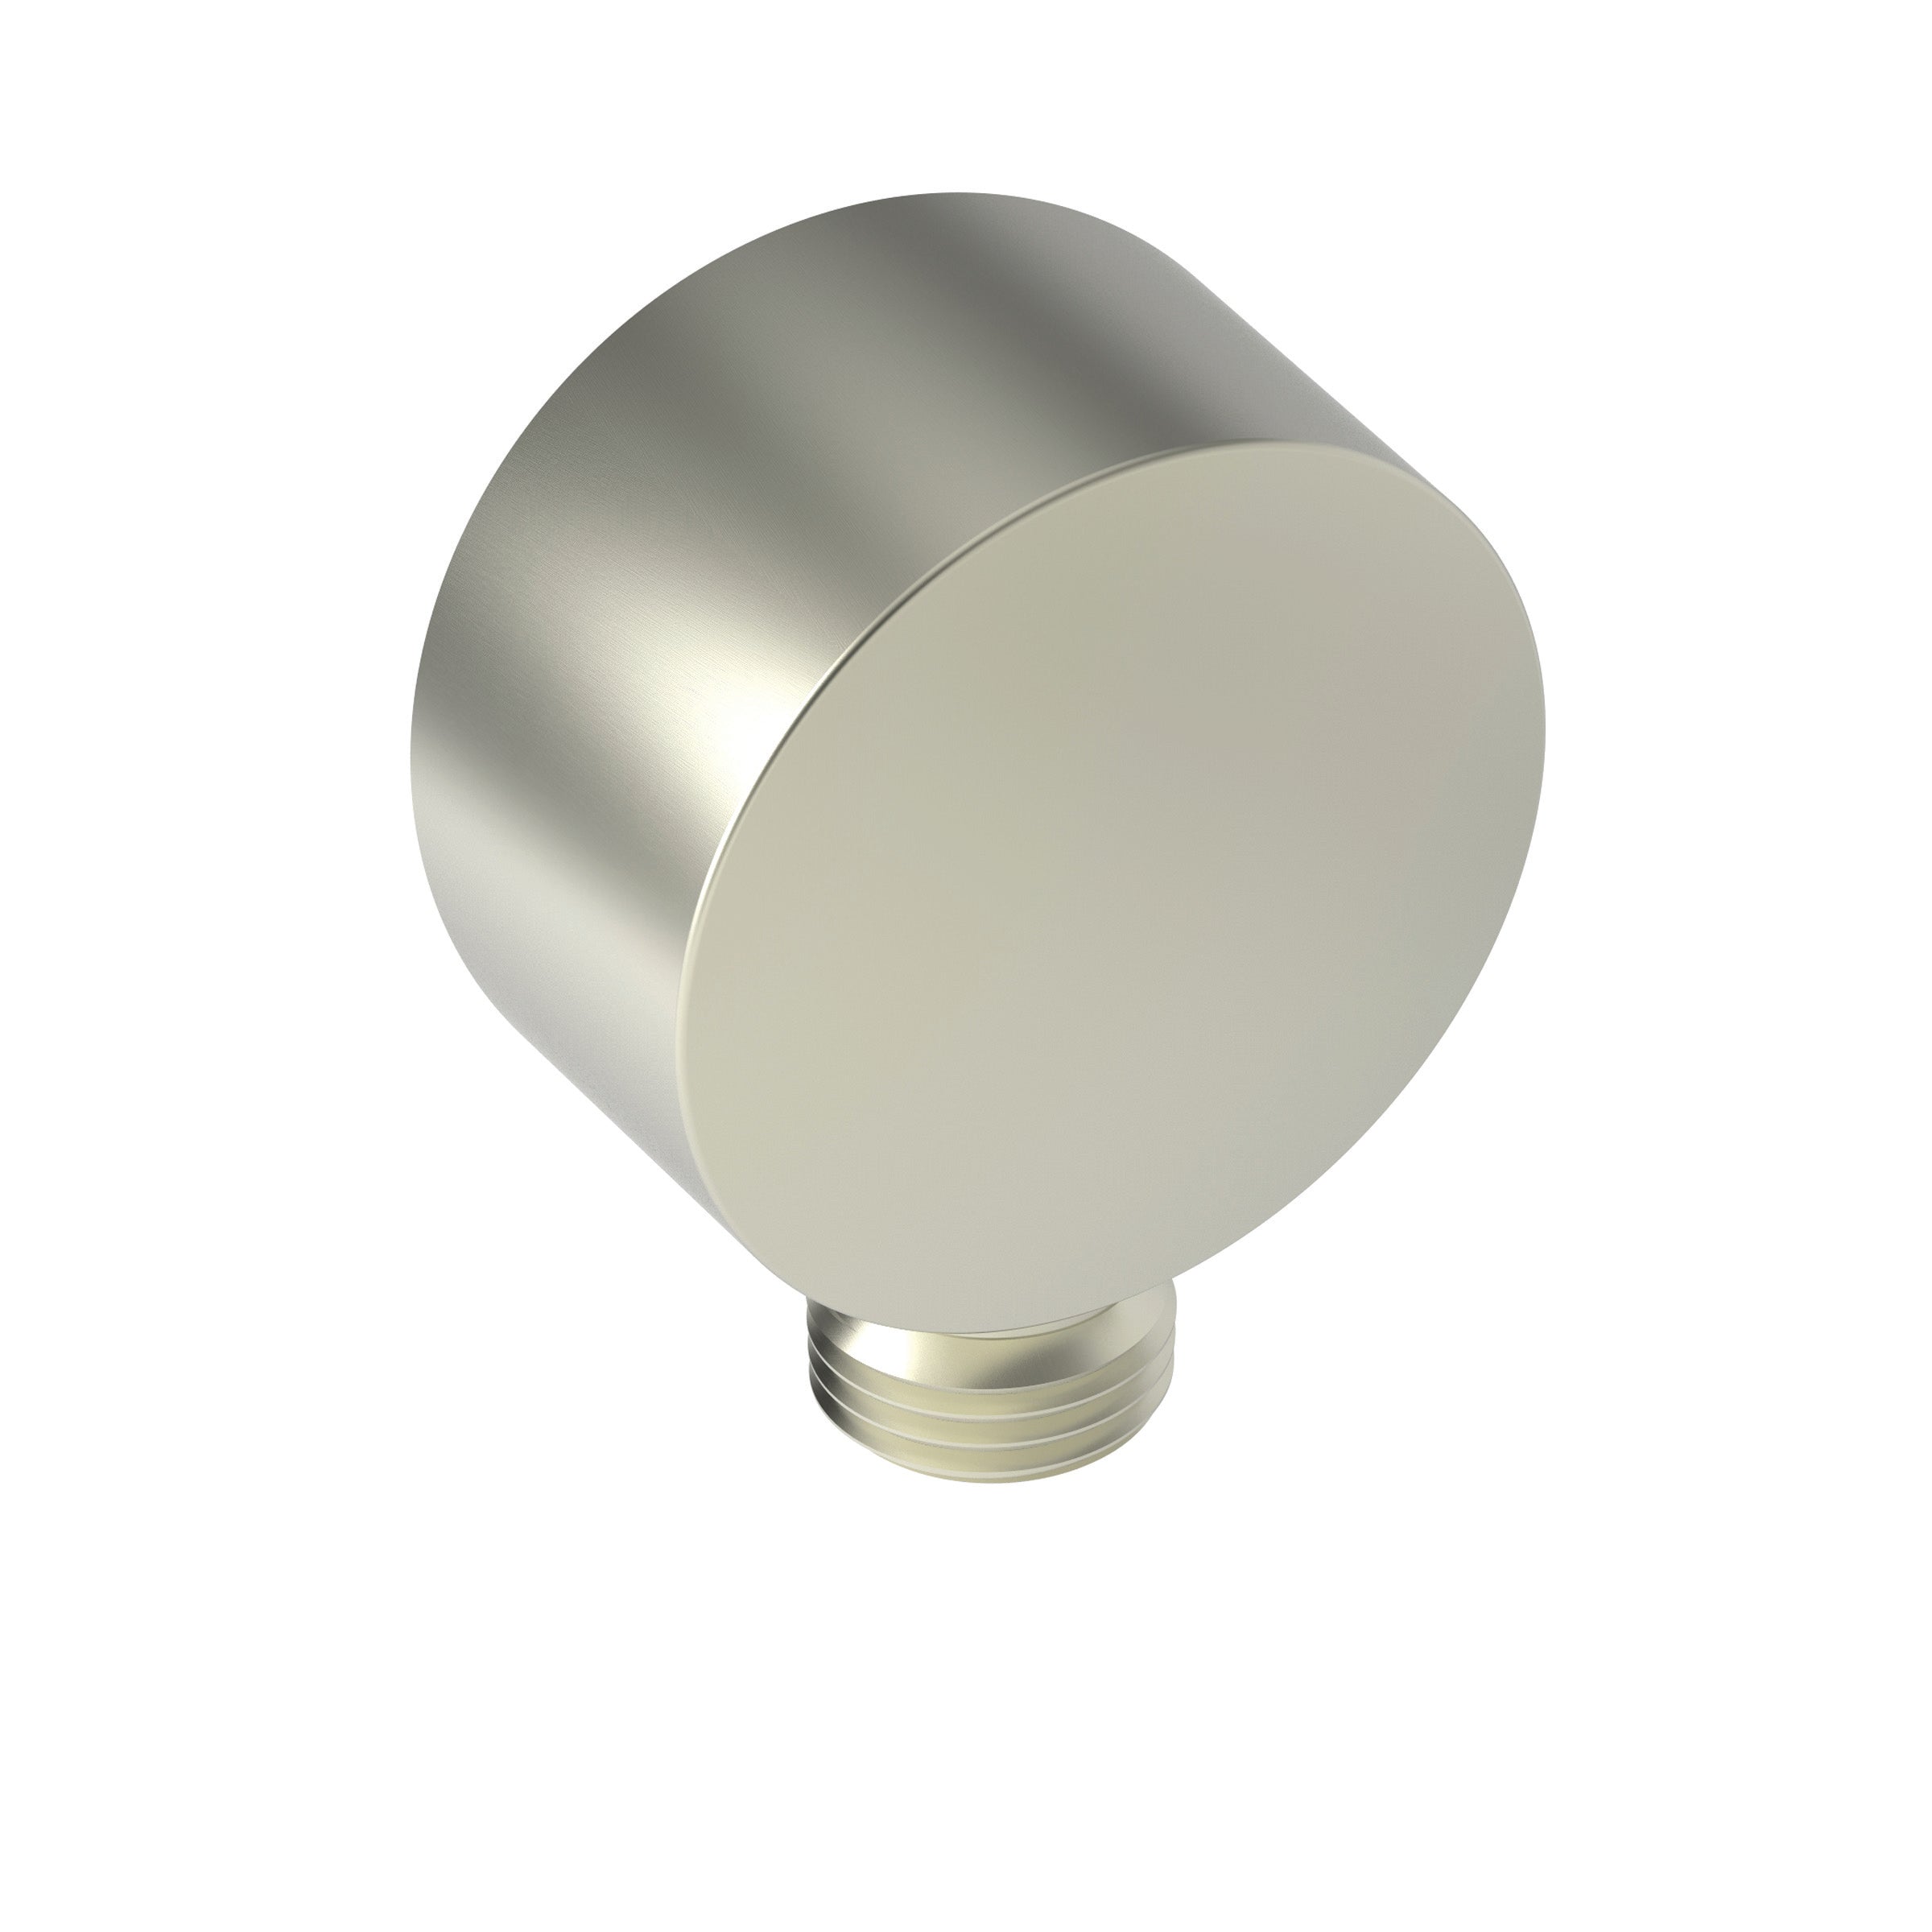 Newport Brass Tub & Shower Wall Supply Elbow for Hand Shower Hose